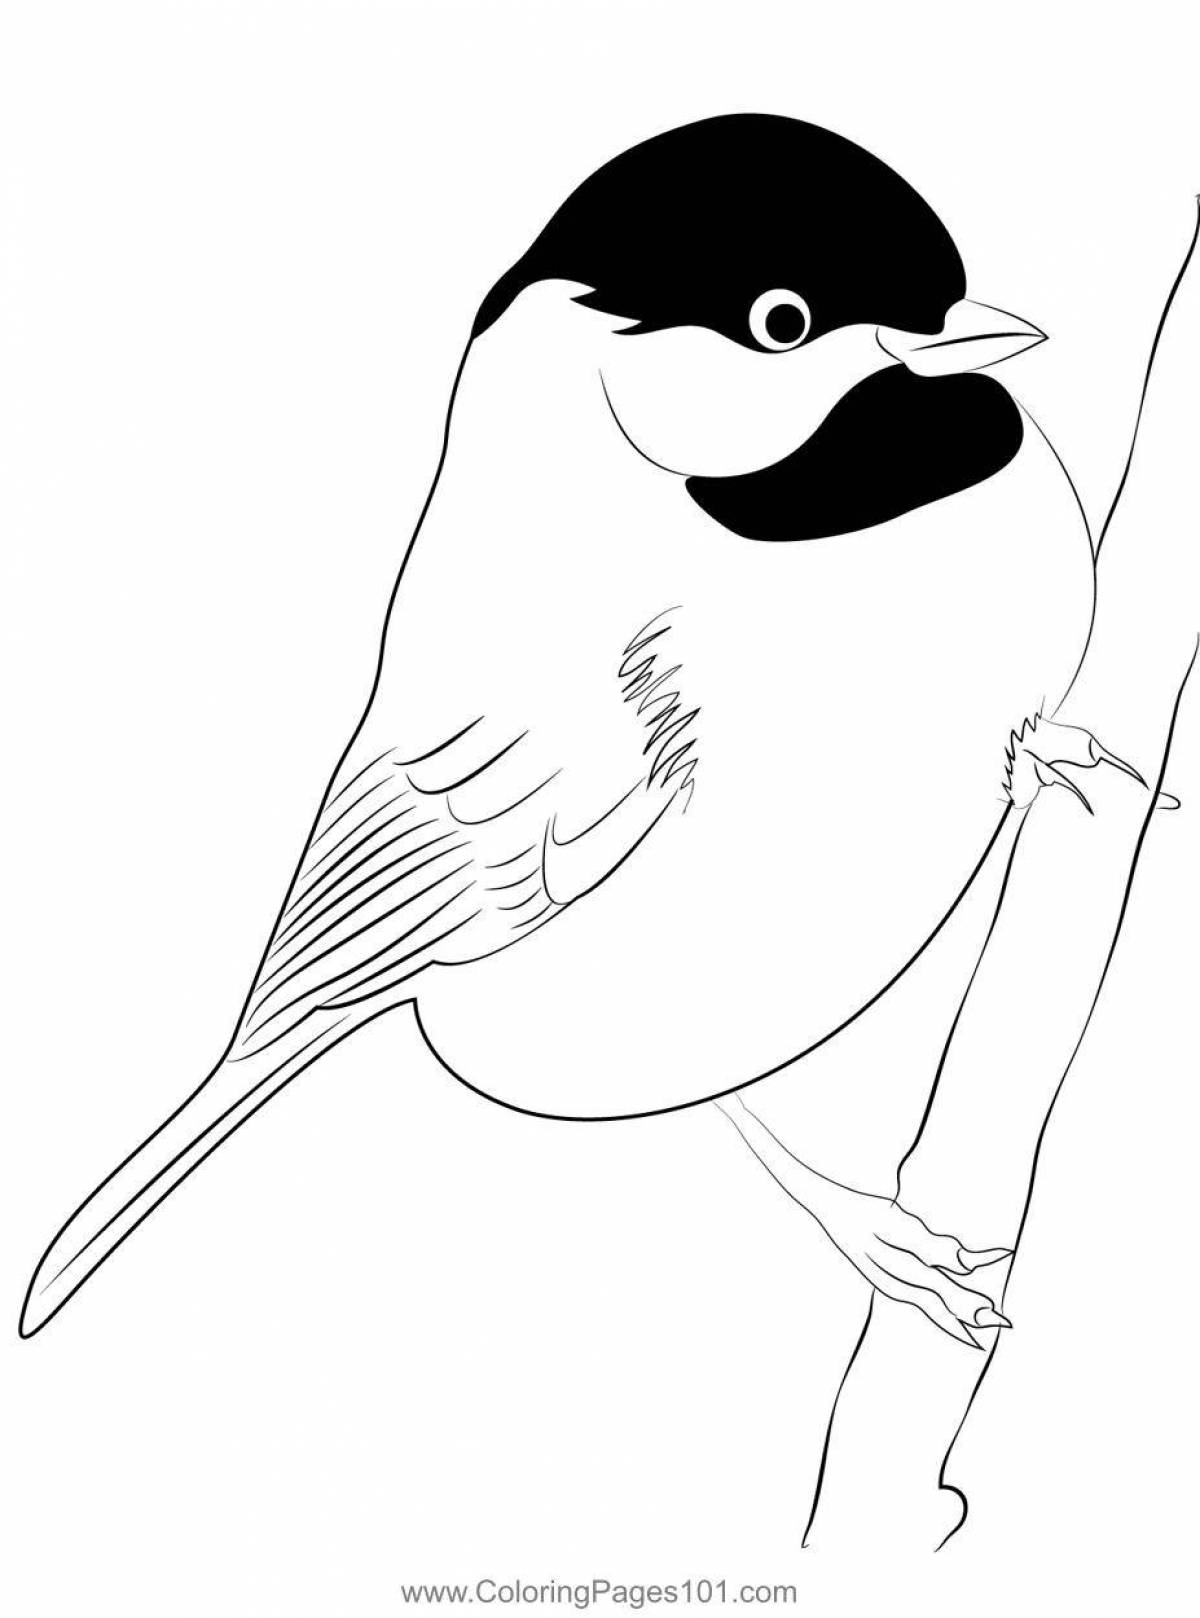 Children's titmouse coloring book for kids